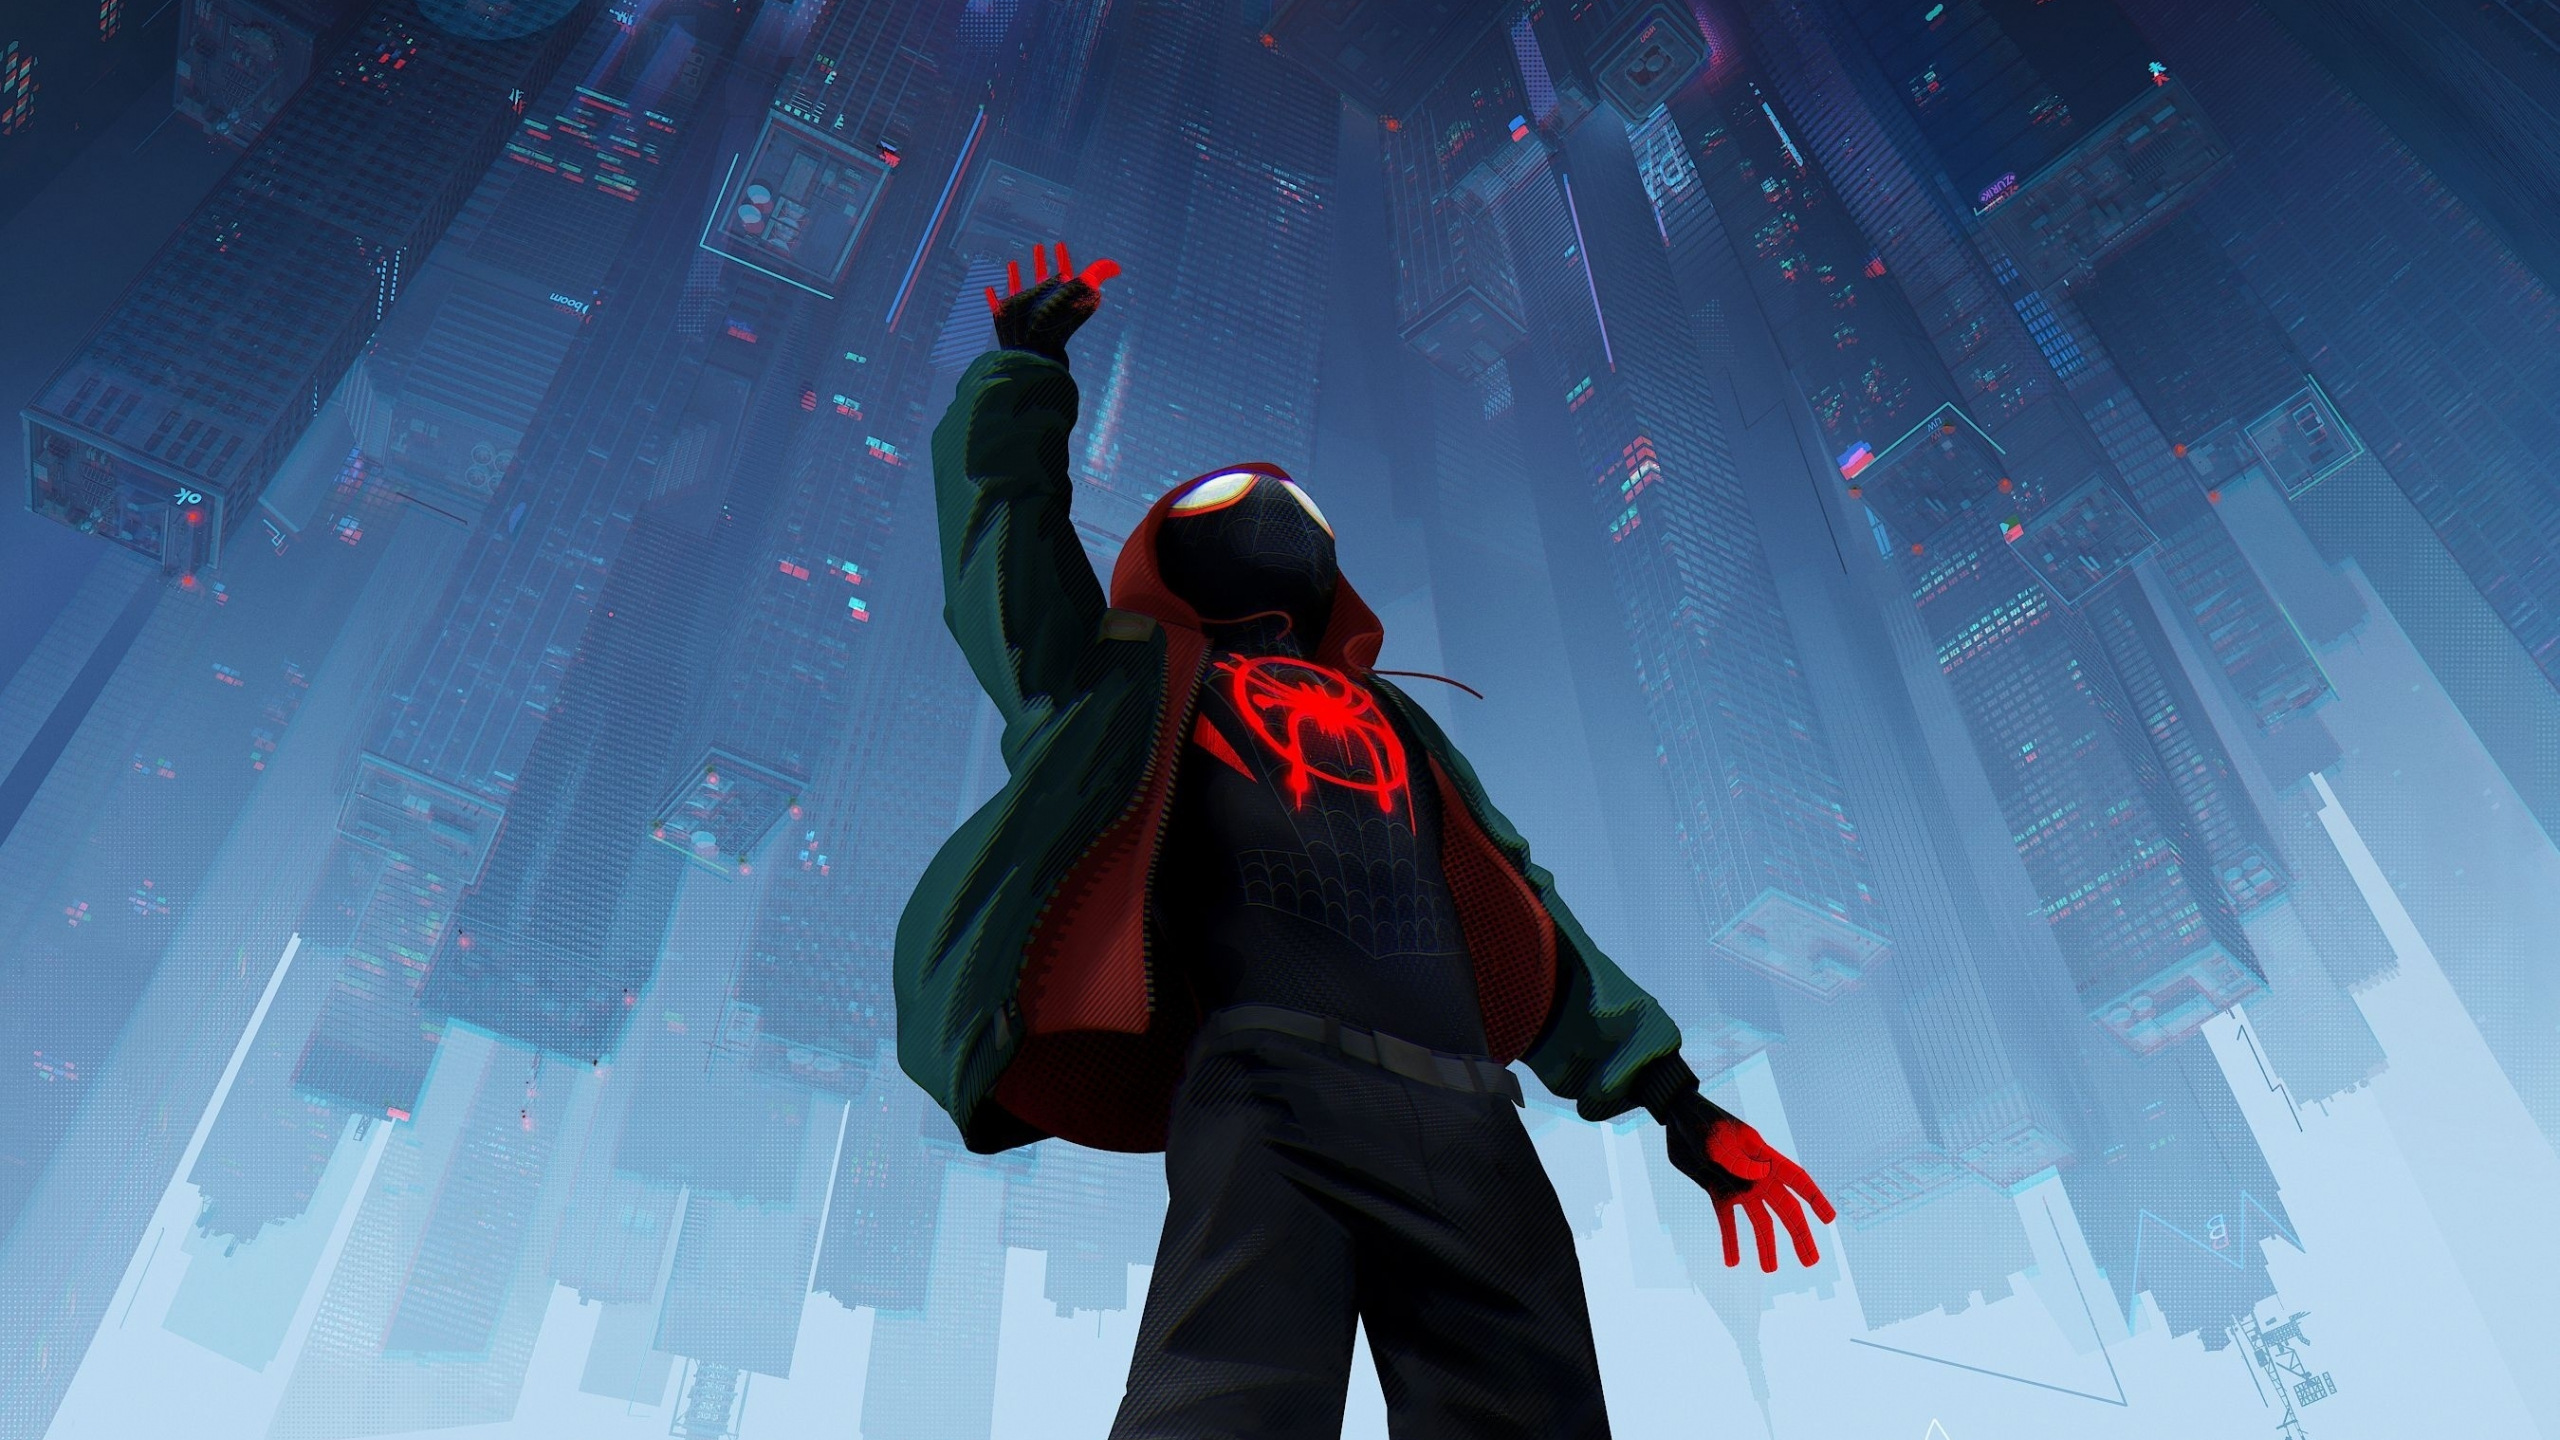 Download Wallpaper 2560x1440 Spider Man Into The Spider Verse 2018 Movie Poster Dual Wide 8228